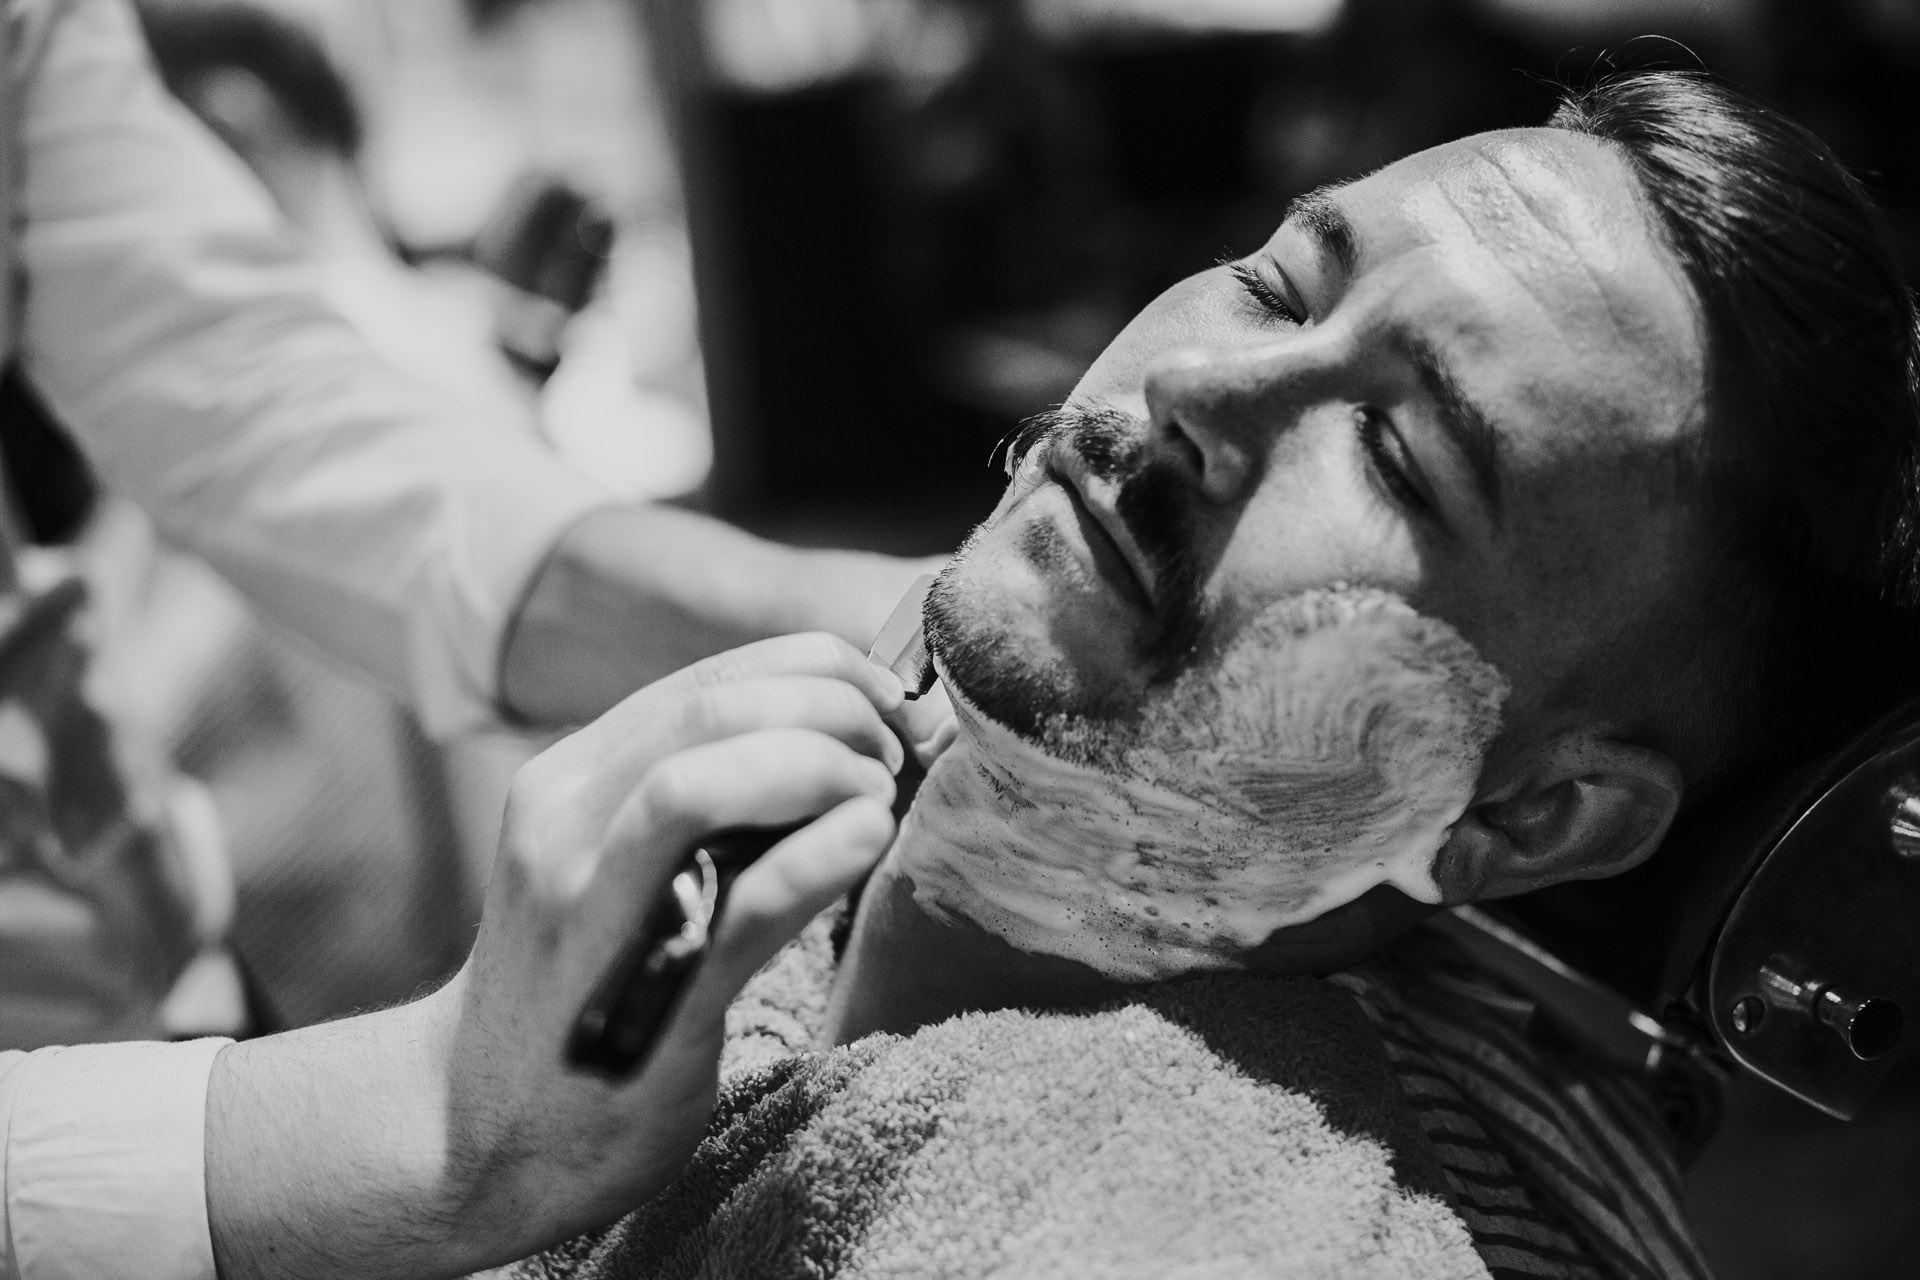 Groom getting cut throat shave, black and white photograph